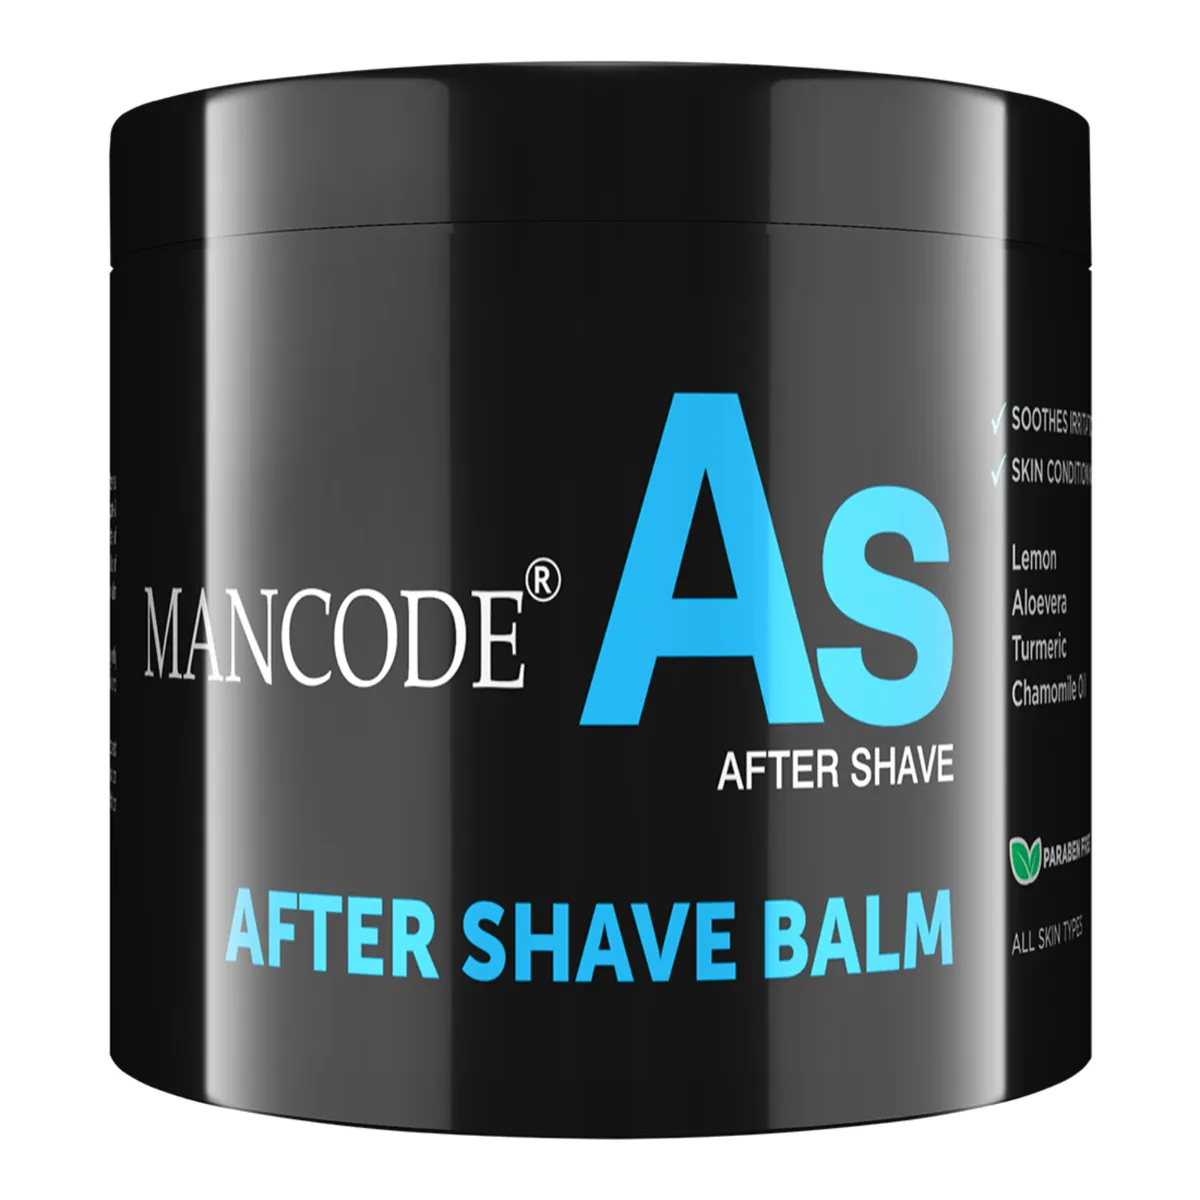 Mancode After Shave Balm 100g